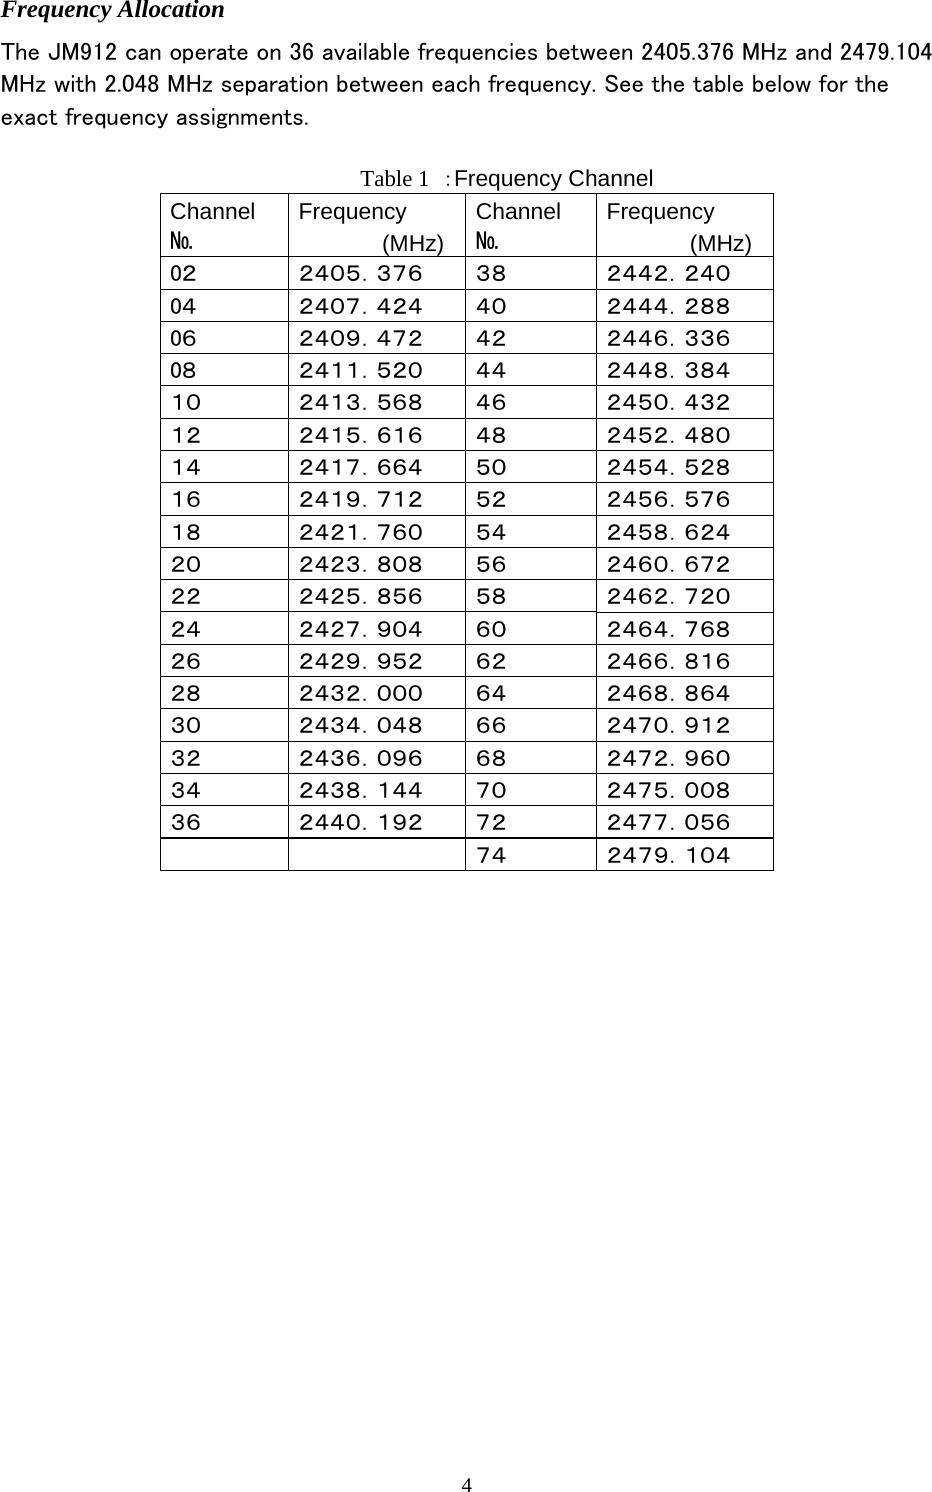 4  Frequency Allocation The JM912 can operate on 36 available frequencies between 2405.376 MHz and 2479.104 MHz with 2.048 MHz separation between each frequency. See the table below for the exact frequency assignments.  Table 1  ：Frequency Channel Channel № Frequency (MHz) Channel № Frequency (MHz) 0２  ２４０５．３７６  ３８  ２４４２．２４０ 0４  ２４０７．４２４  ４０  ２４４４．２８８ 0６  ２４０９．４７２  ４２  ２４４６．３３６ 0８  ２４１１．５２０  ４４  ２４４８．３８４ １０  ２４１３．５６８  ４６  ２４５０．４３２ １２  ２４１５．６１６  ４８  ２４５２．４８０ １４  ２４１７．６６４  ５０  ２４５４．５２８ １６  ２４１９．７１２  ５２  ２４５６．５７６ １８  ２４２１．７６０  ５４  ２４５８．６２４ ２０  ２４２３．８０８  ５６  ２４６０．６７２ ２２  ２４２５．８５６  ５８  ２４６２．７２０ ２４  ２４２７．９０４  ６０  ２４６４．７６８ ２６  ２４２９．９５２  ６２  ２４６６．８１６ ２８  ２４３２．０００  ６４  ２４６８．８６４ ３０  ２４３４．０４８  ６６  ２４７０．９１２ ３２  ２４３６．０９６  ６８  ２４７２．９６０ ３４  ２４３８．１４４  ７０  ２４７５．００８ ３６  ２４４０．１９２  ７２  ２４７７．０５６     ７４  ２４７９．１０４    